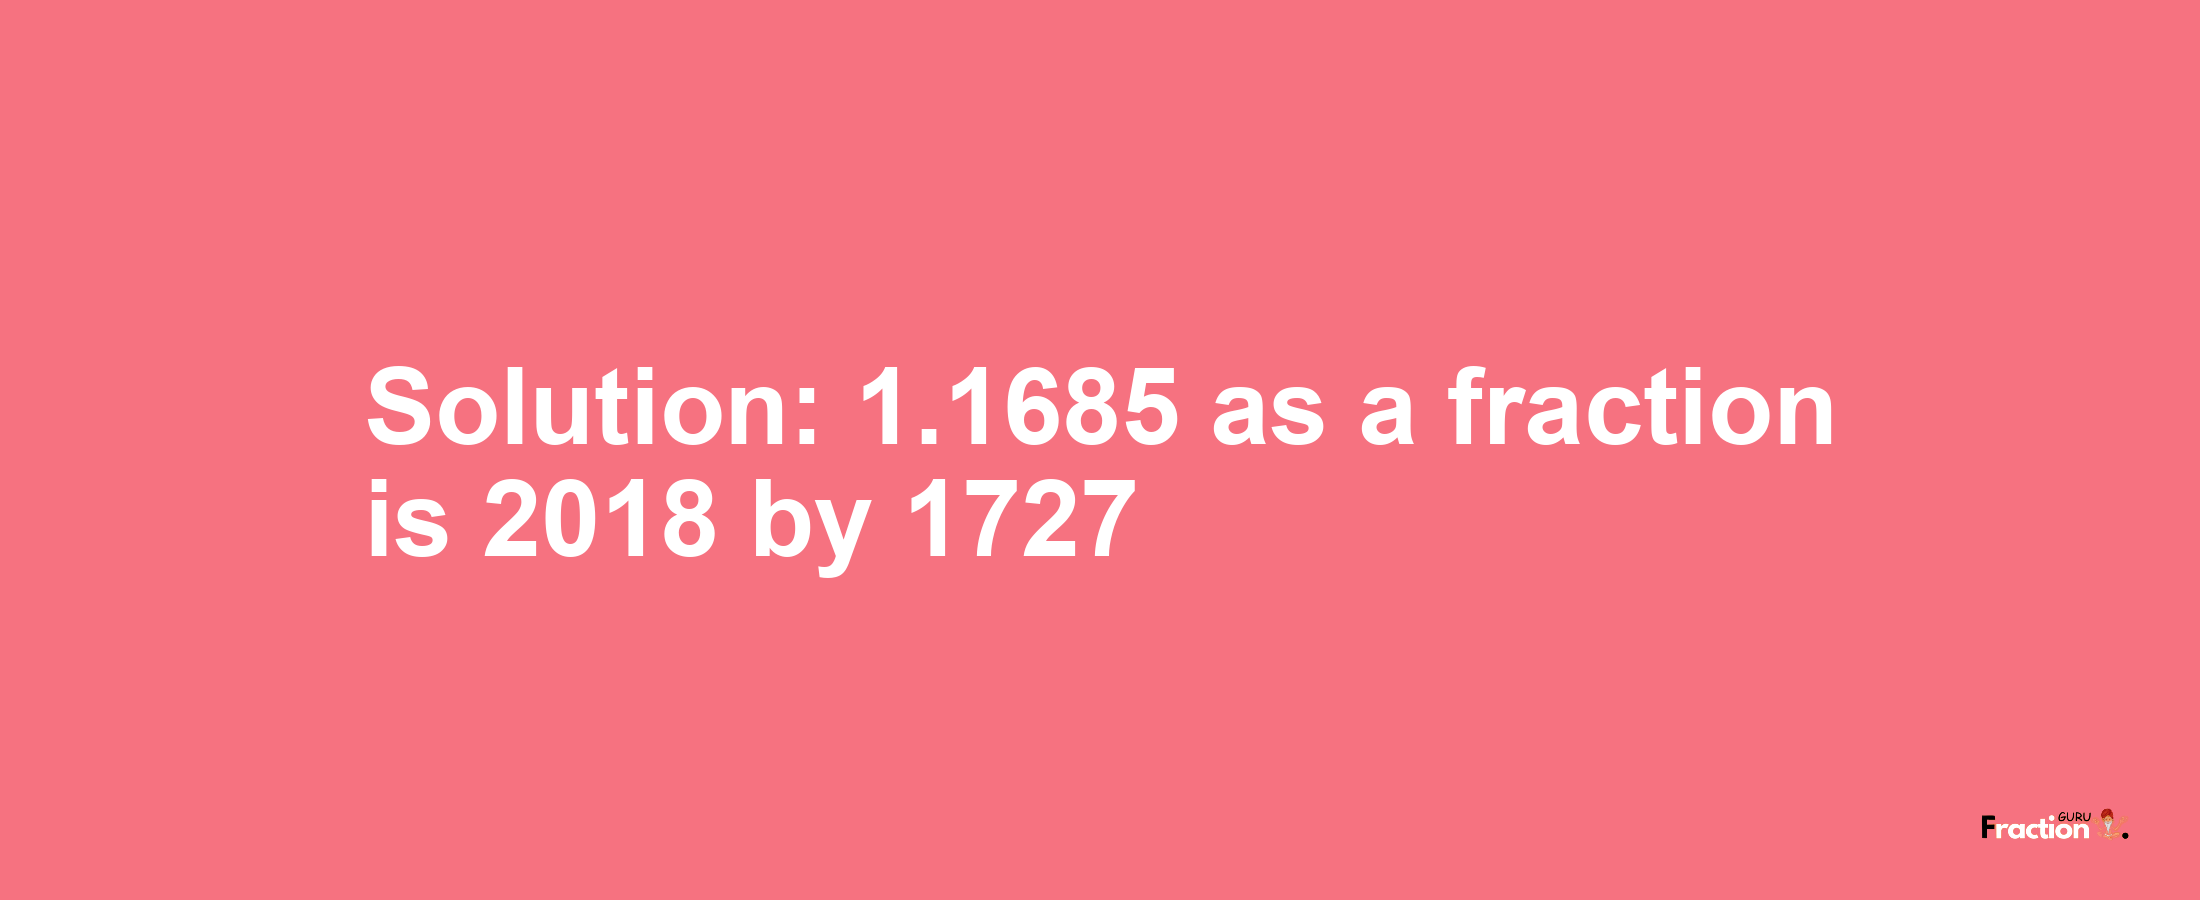 Solution:1.1685 as a fraction is 2018/1727